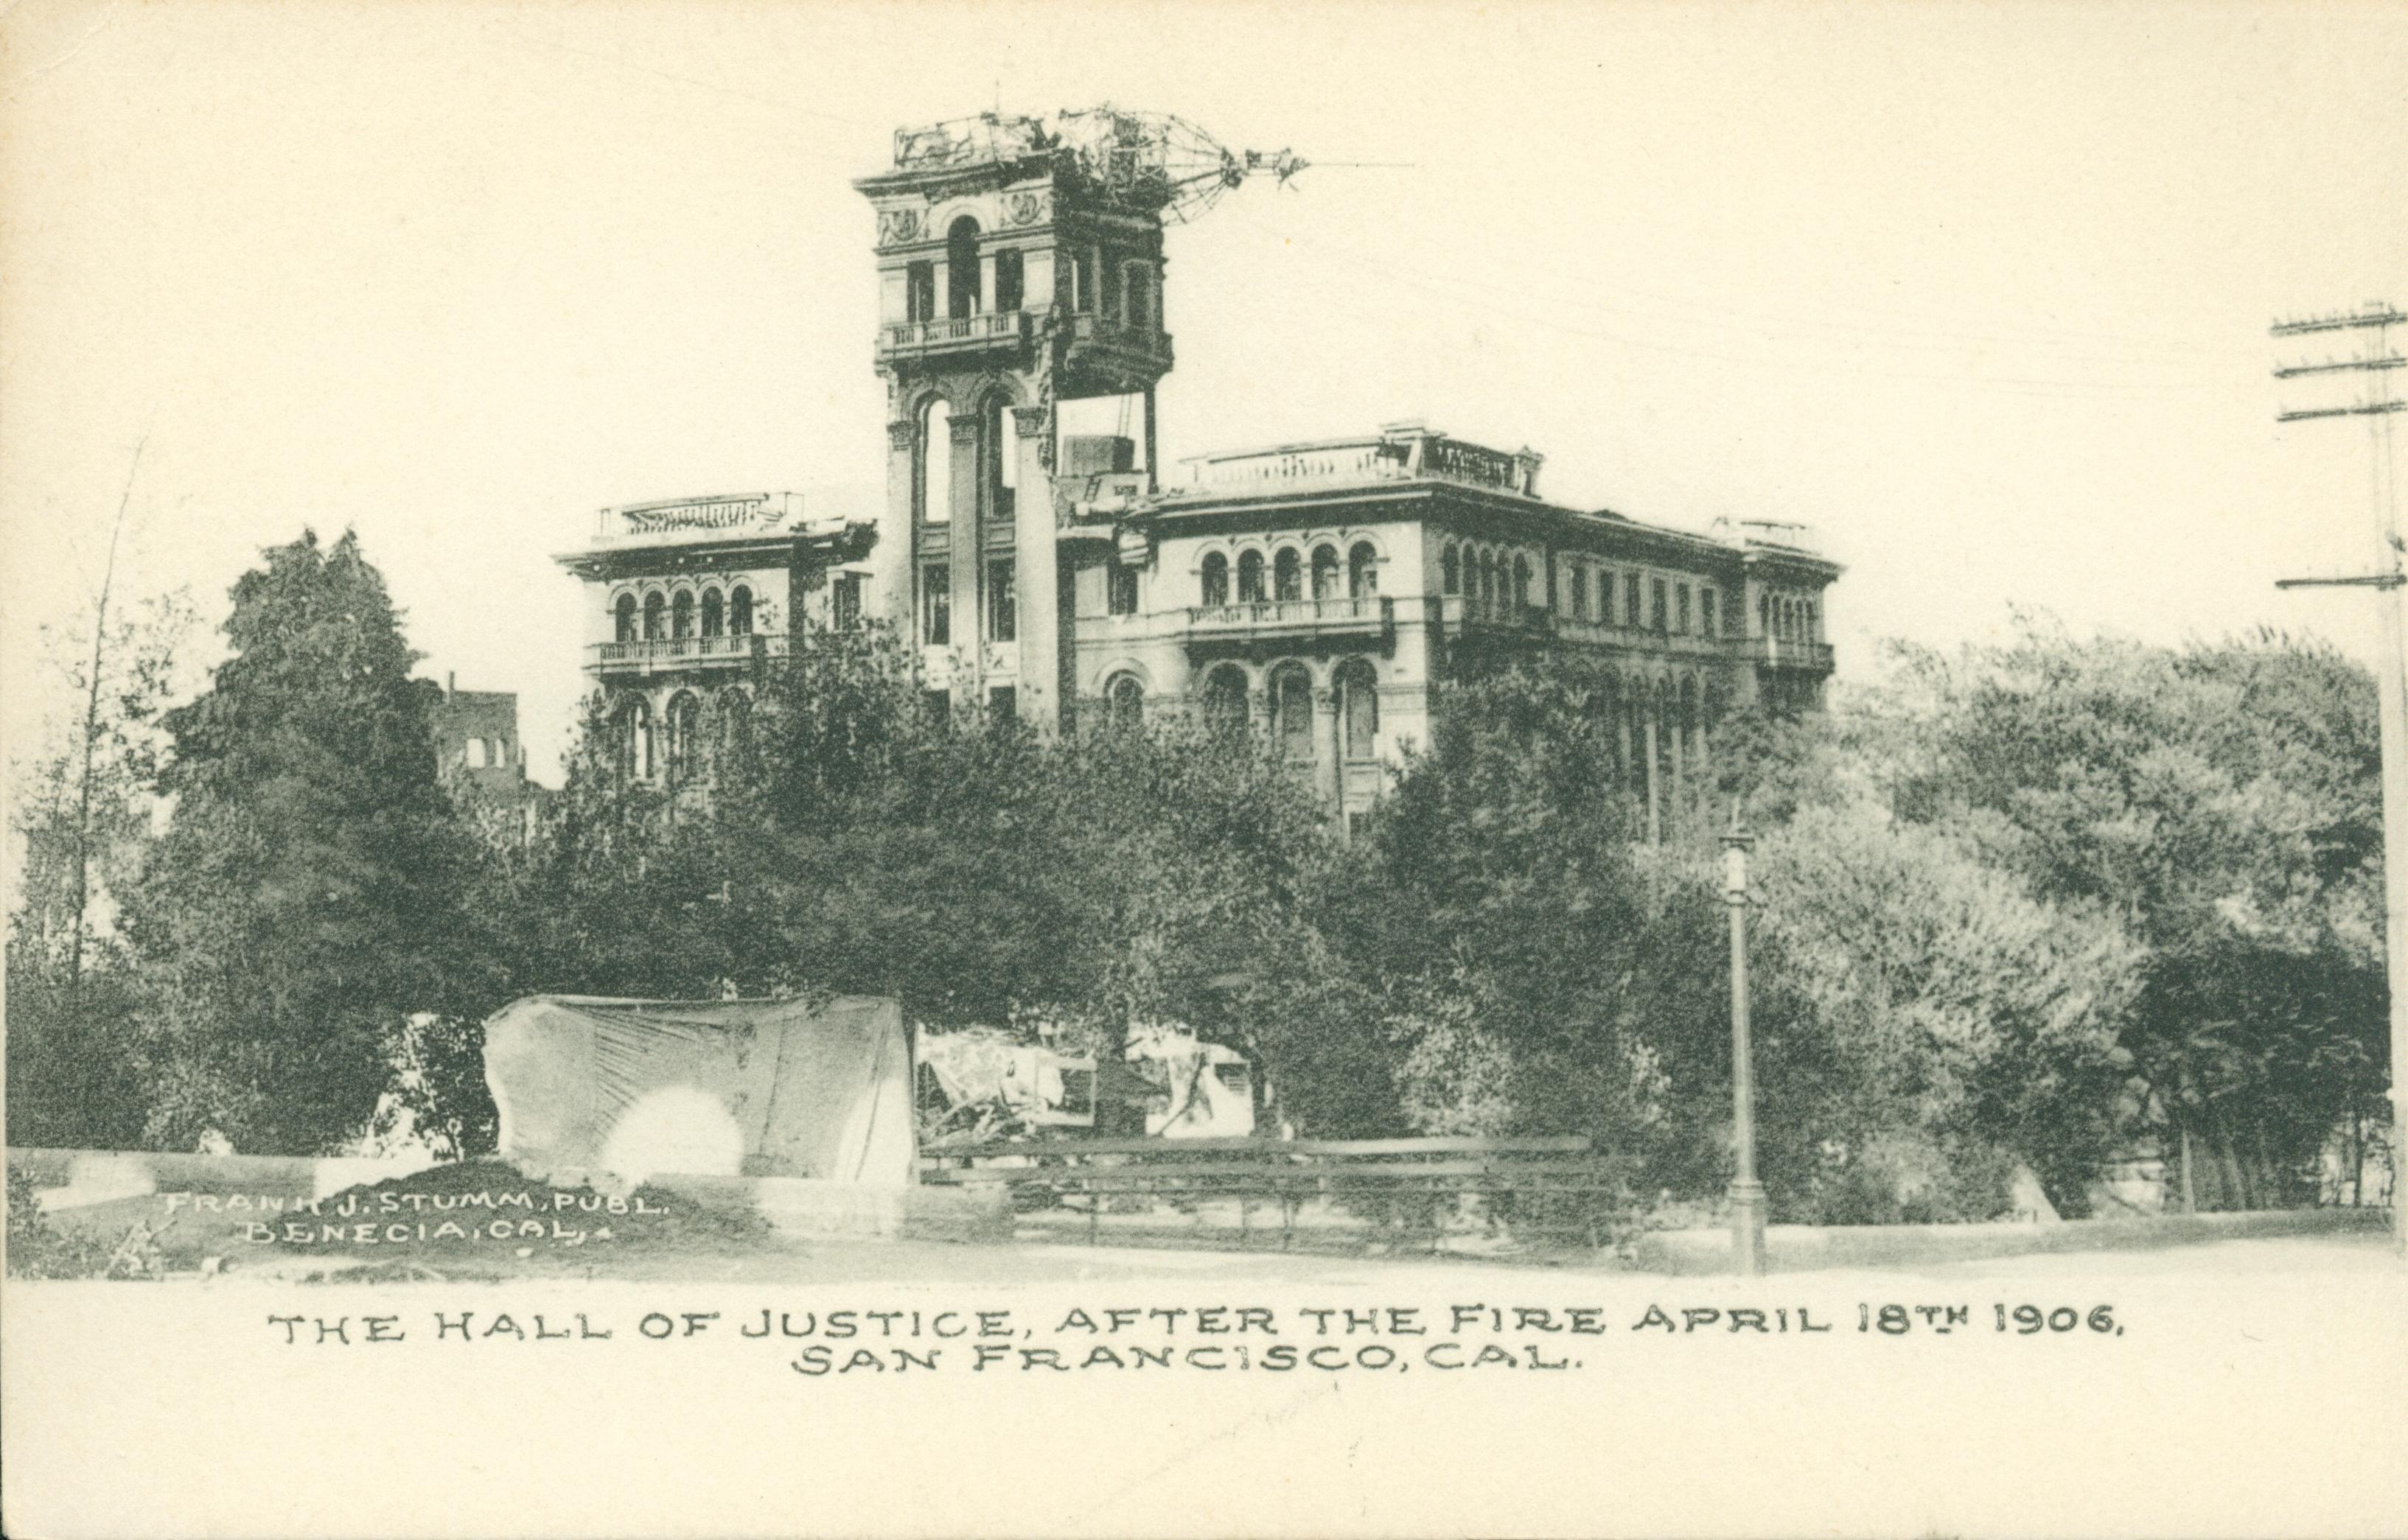 Shows the Hall of Justice after the earthquake